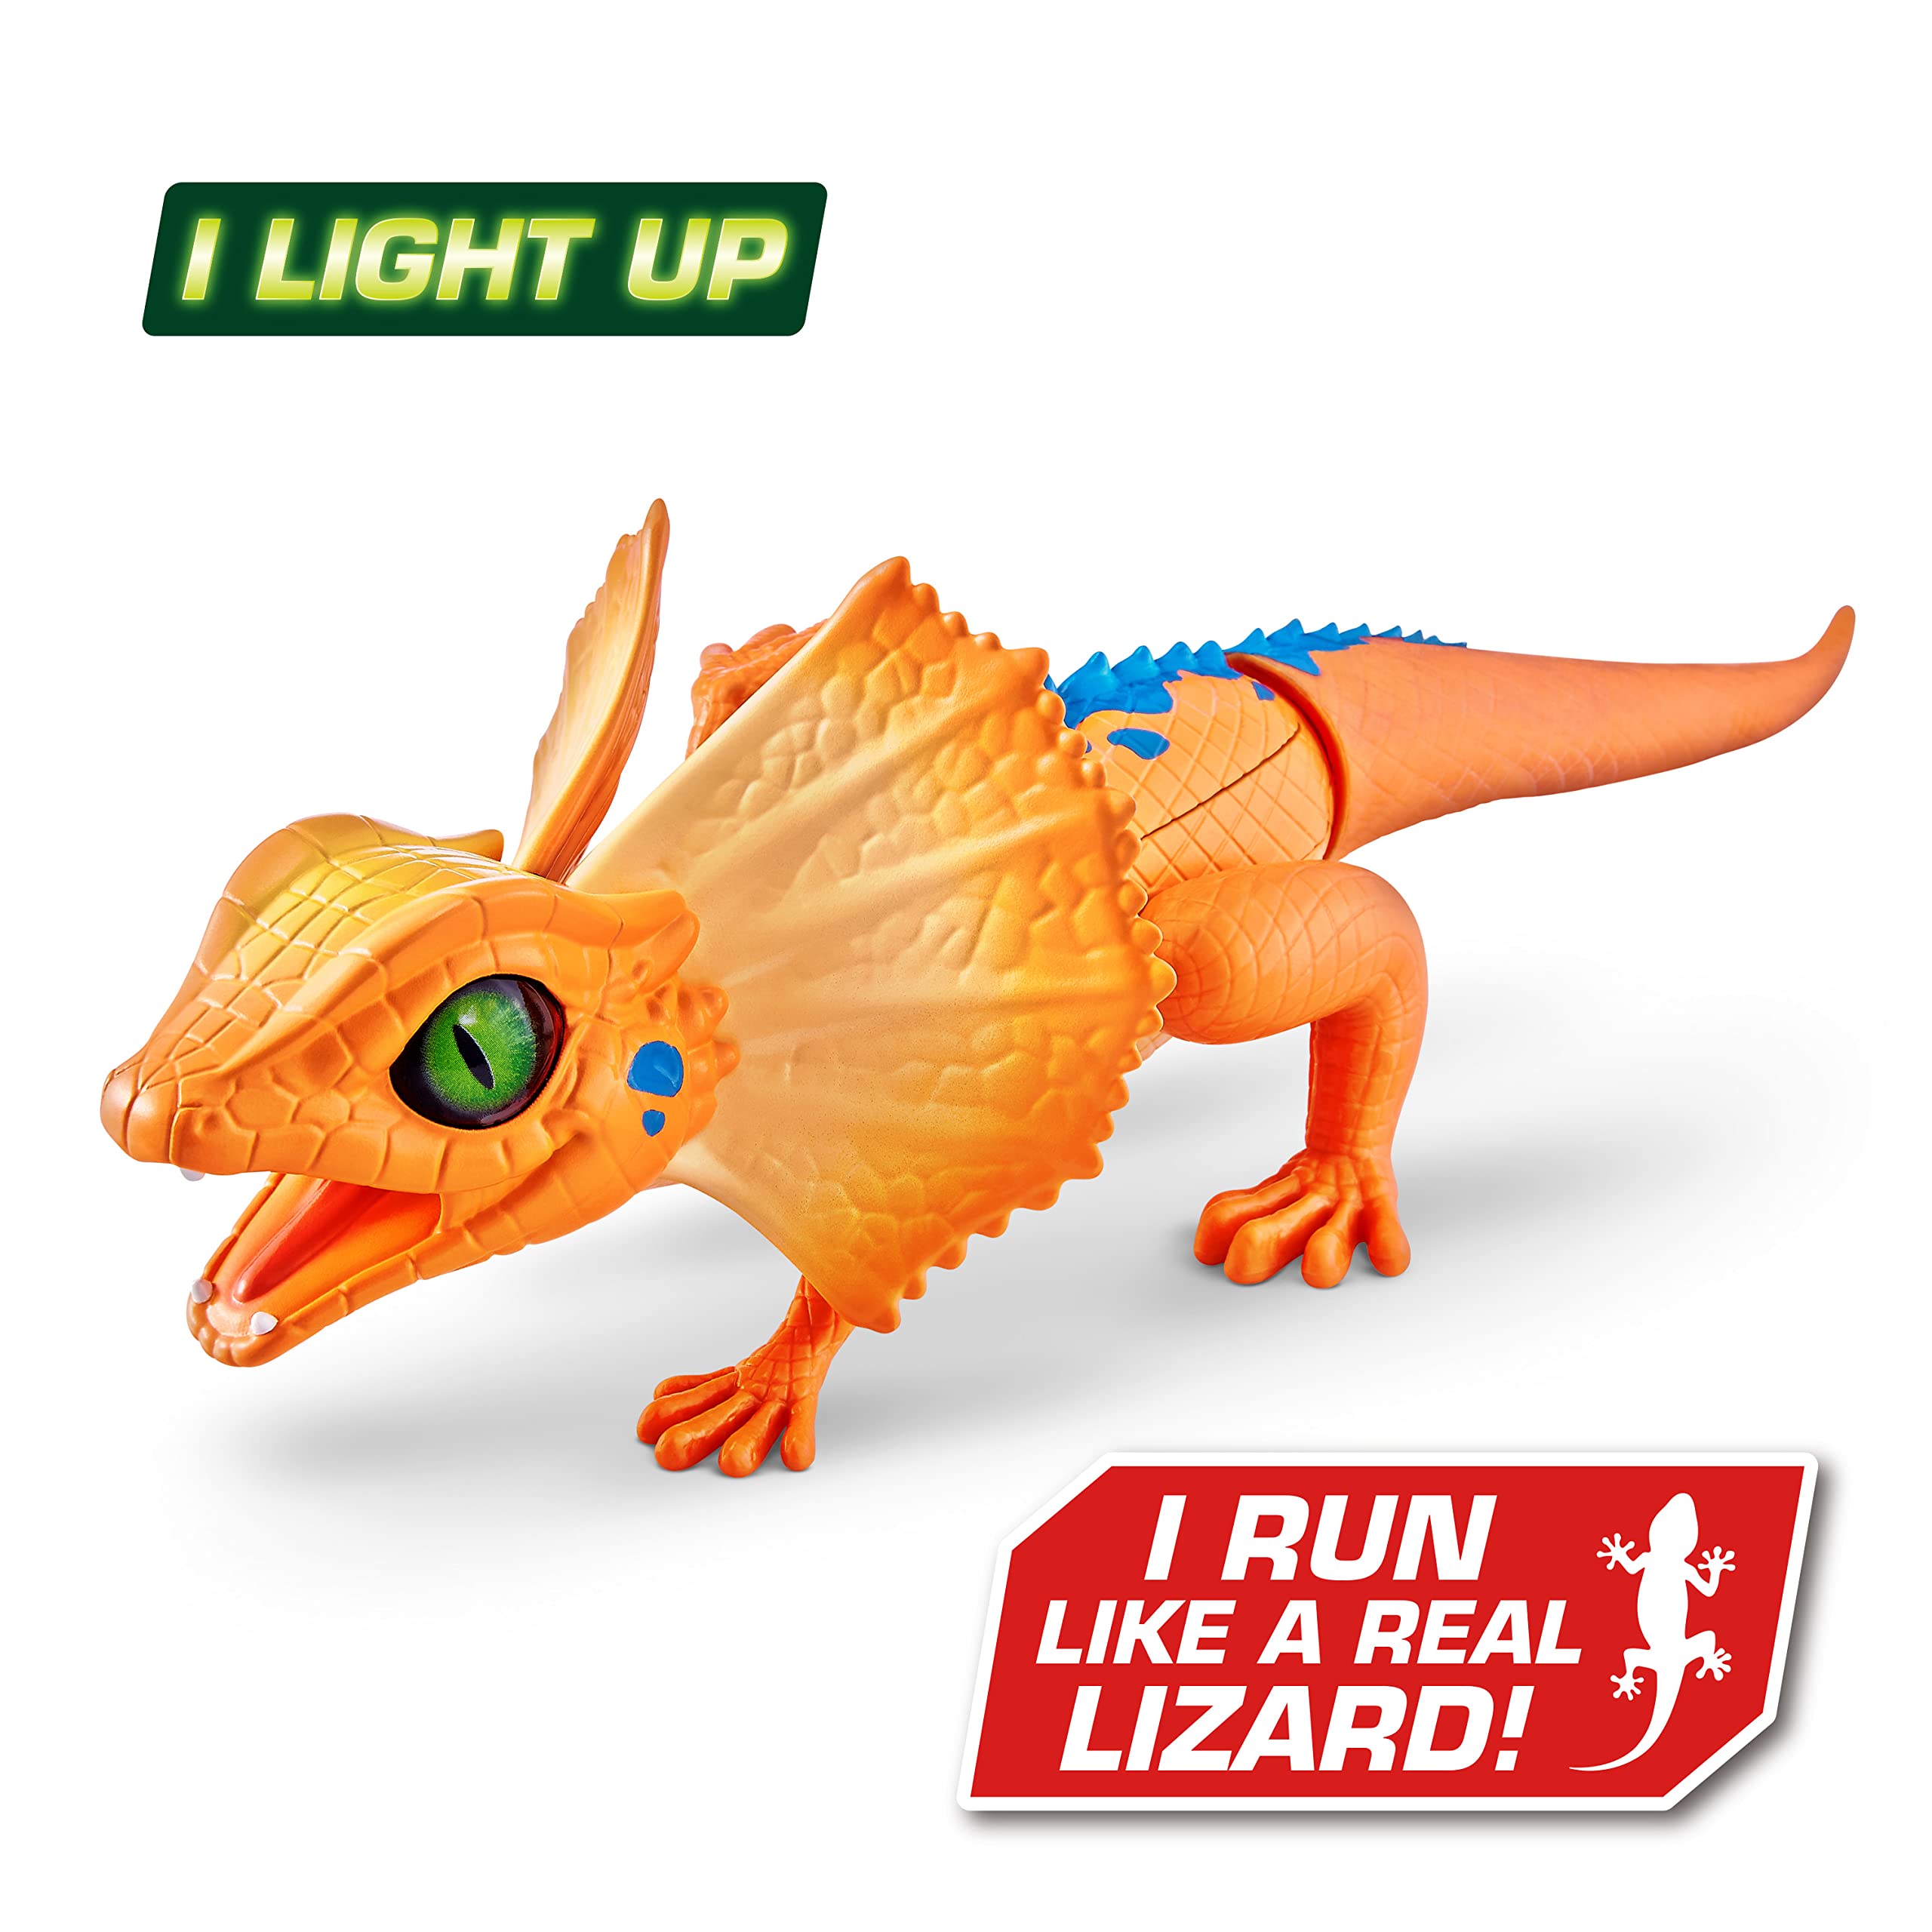 Robo Alive Lurking Lizard Series 3 Orange by ZURU Battery-Powered Robotic Light Up Interactive Electronic Reptile Toy That Moves (Orange)